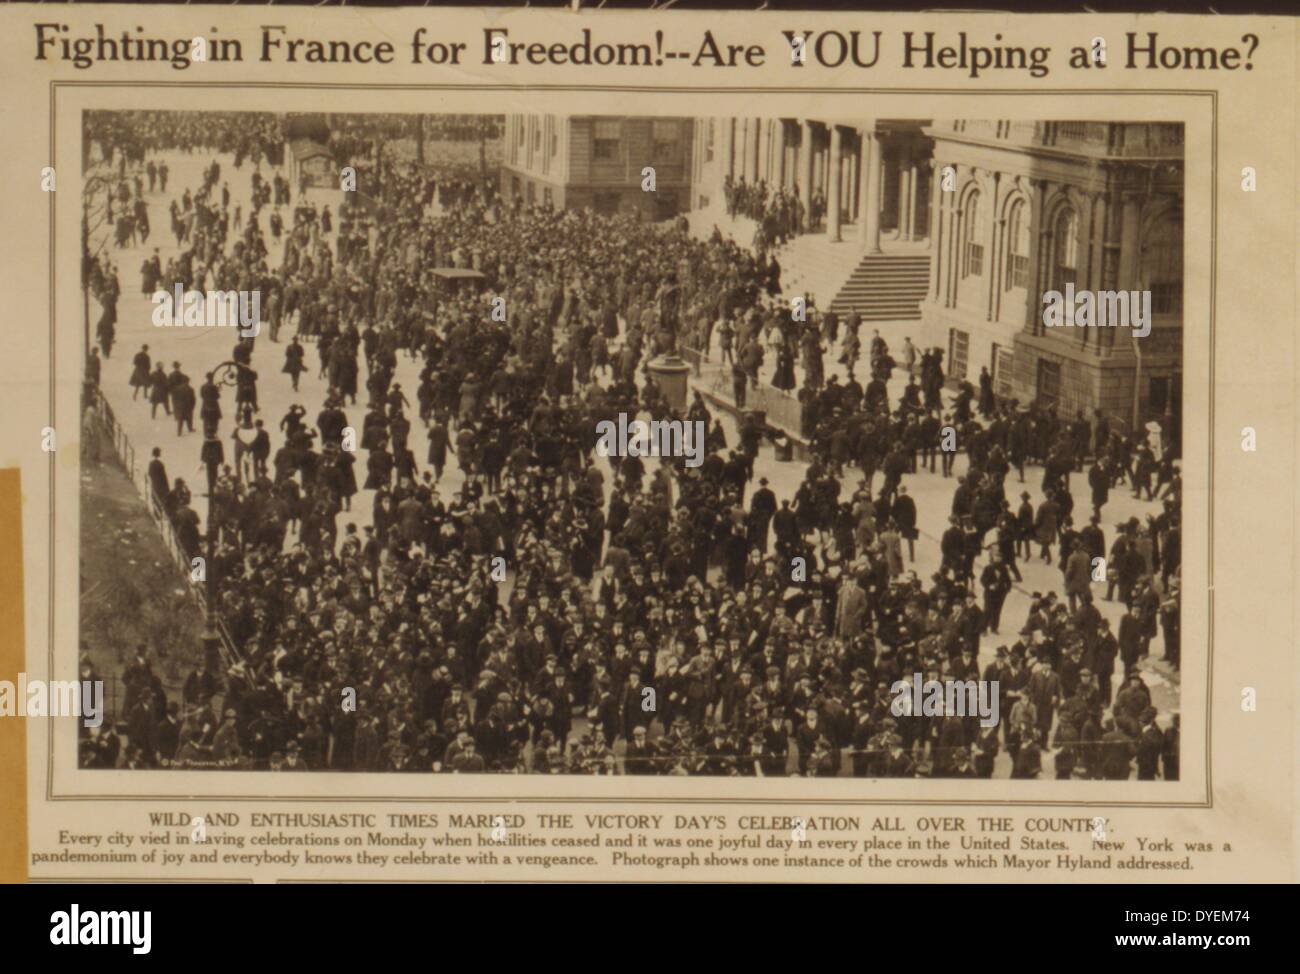 Fighting in France for freedom! Are you helping at home? a series of photographs published in the Illustrated Current News, [1918]. Stock Photo